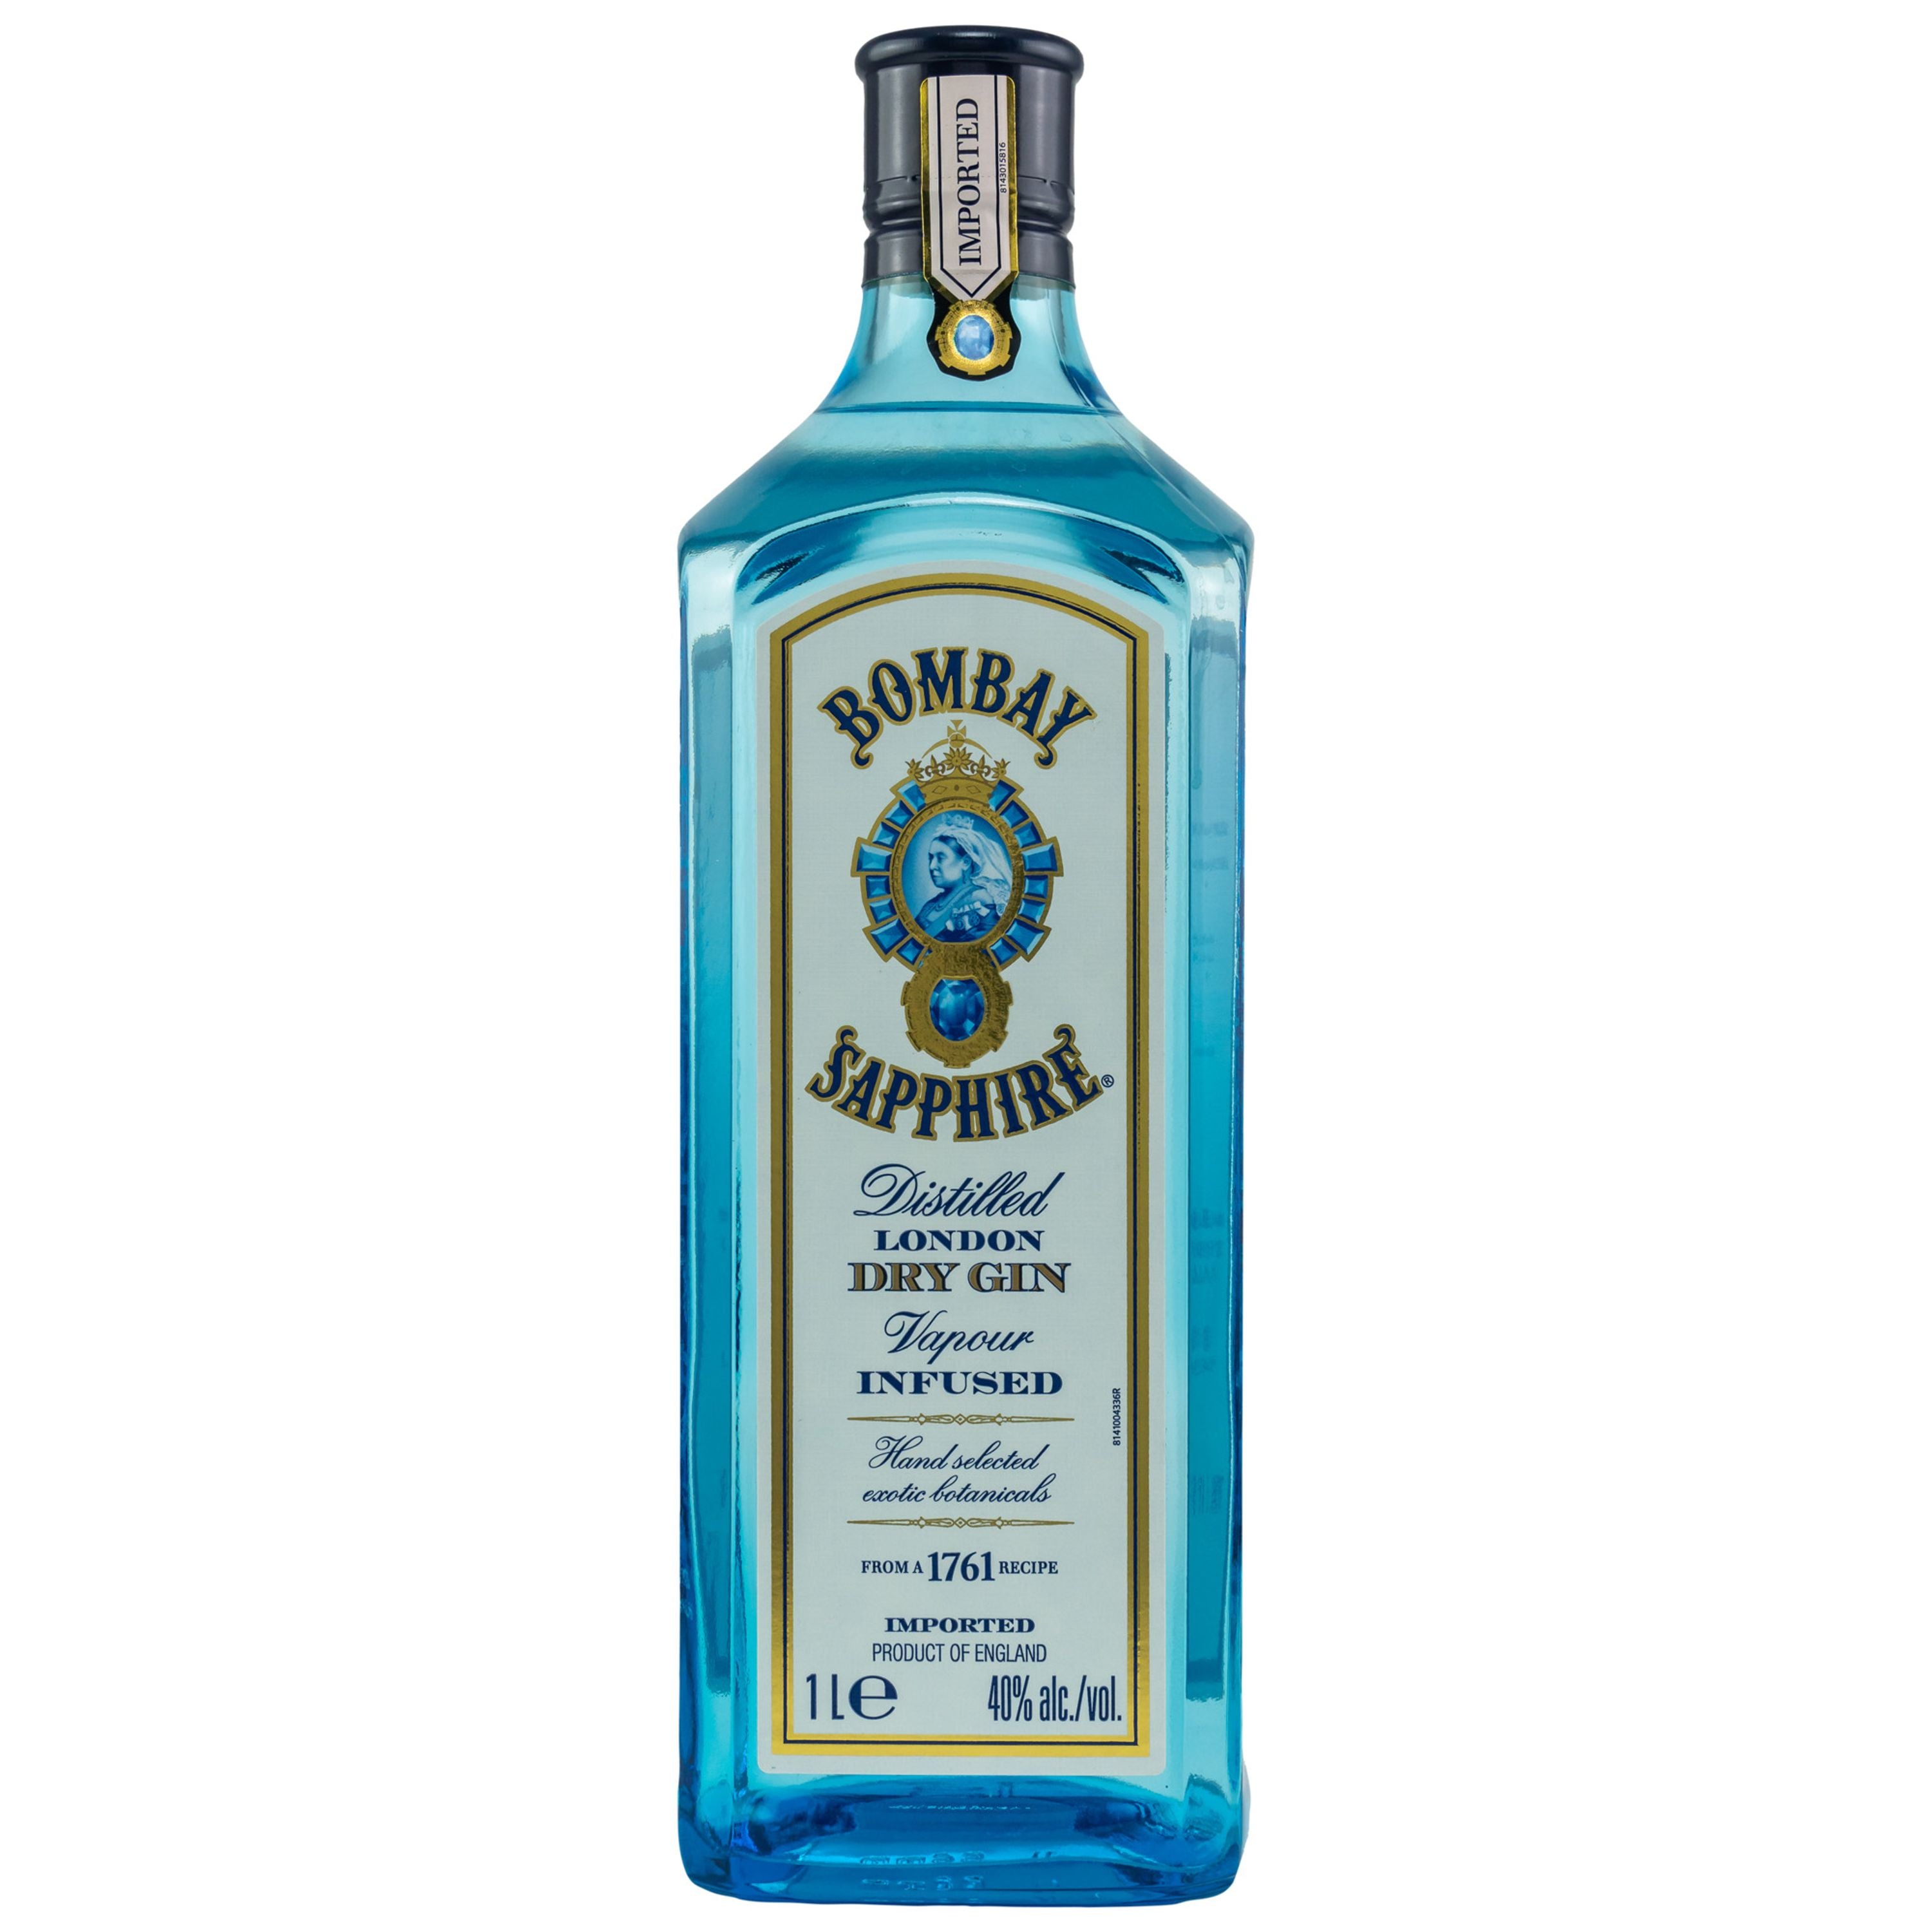 Bombay Sapphire London Dry Gin 1.0l, alc. 40% by volume